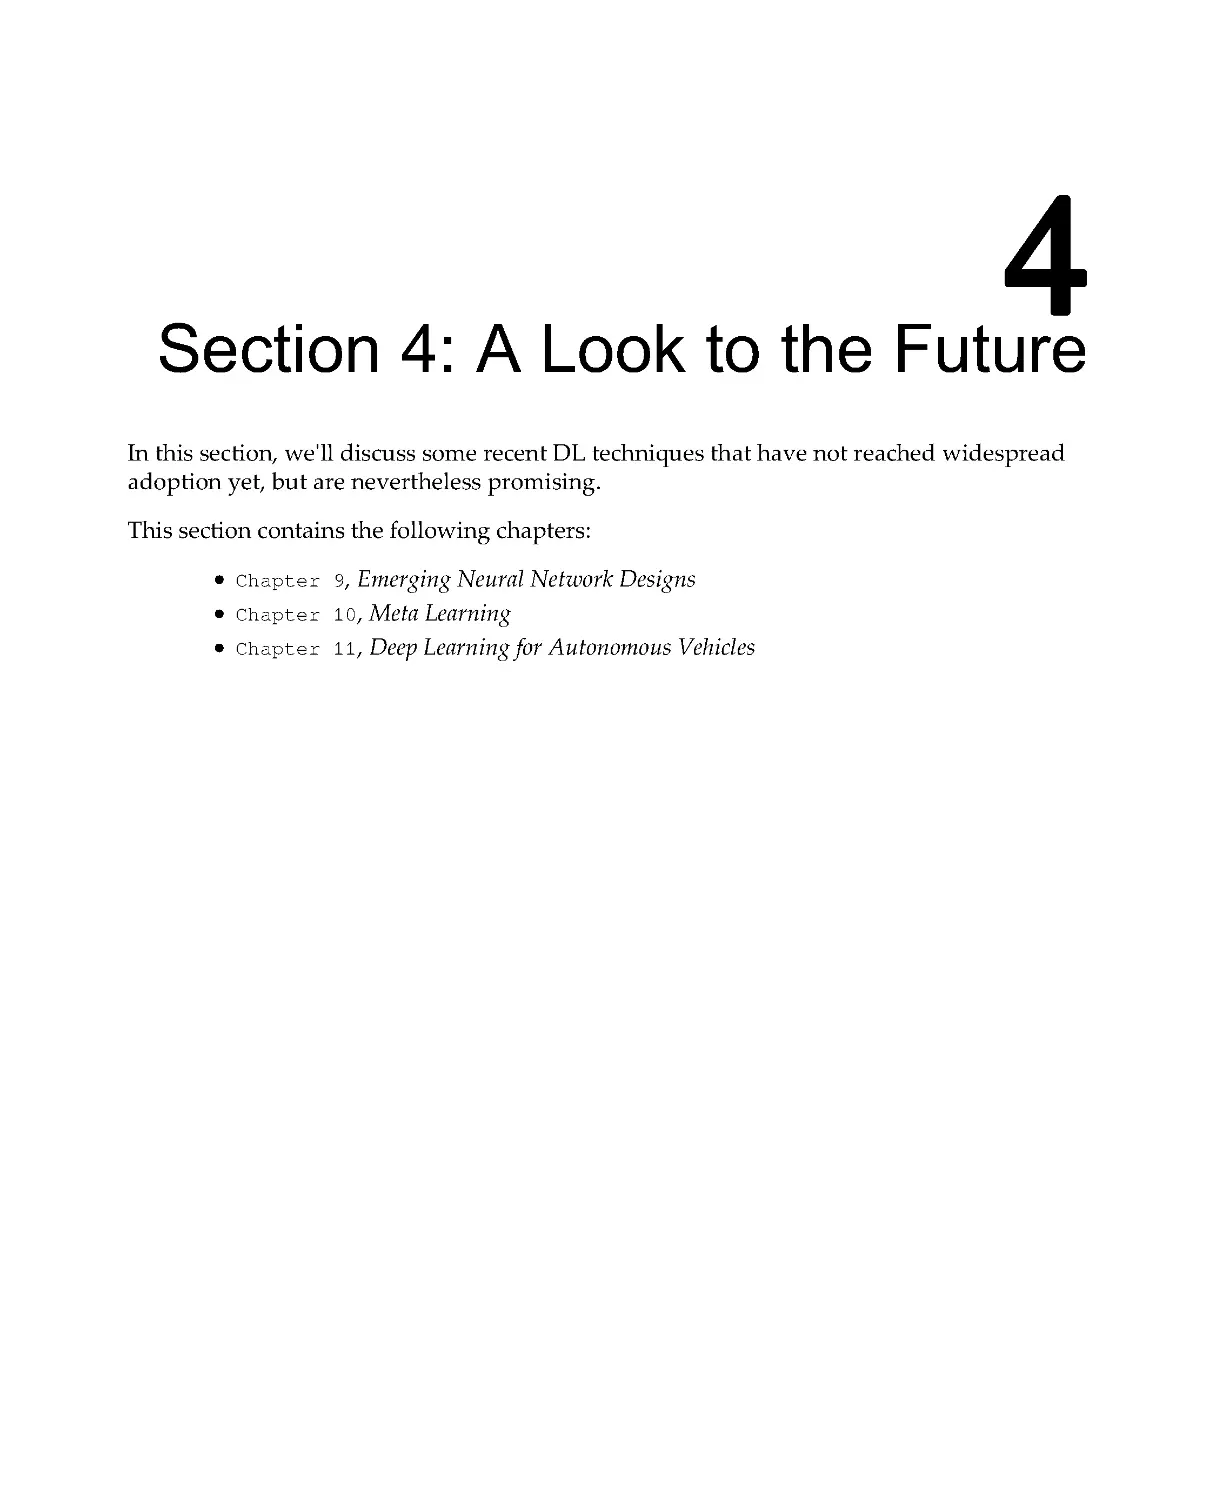 Section 4: A Look to the Future